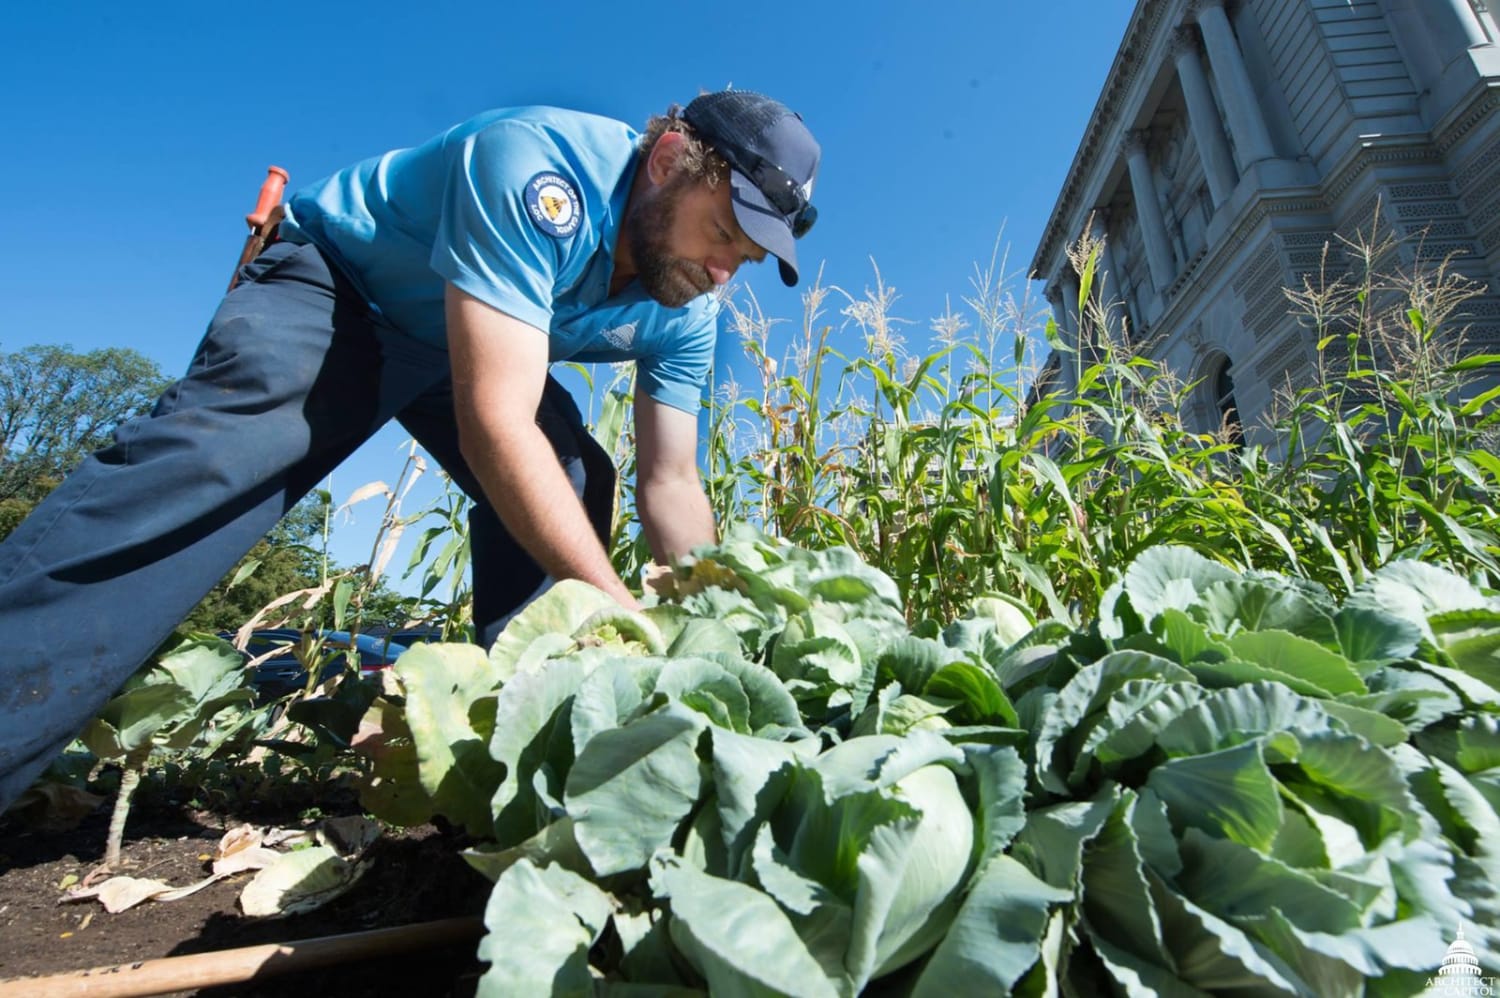 A Century After WWI, a Victory Garden Sows Seeds of Remembrance